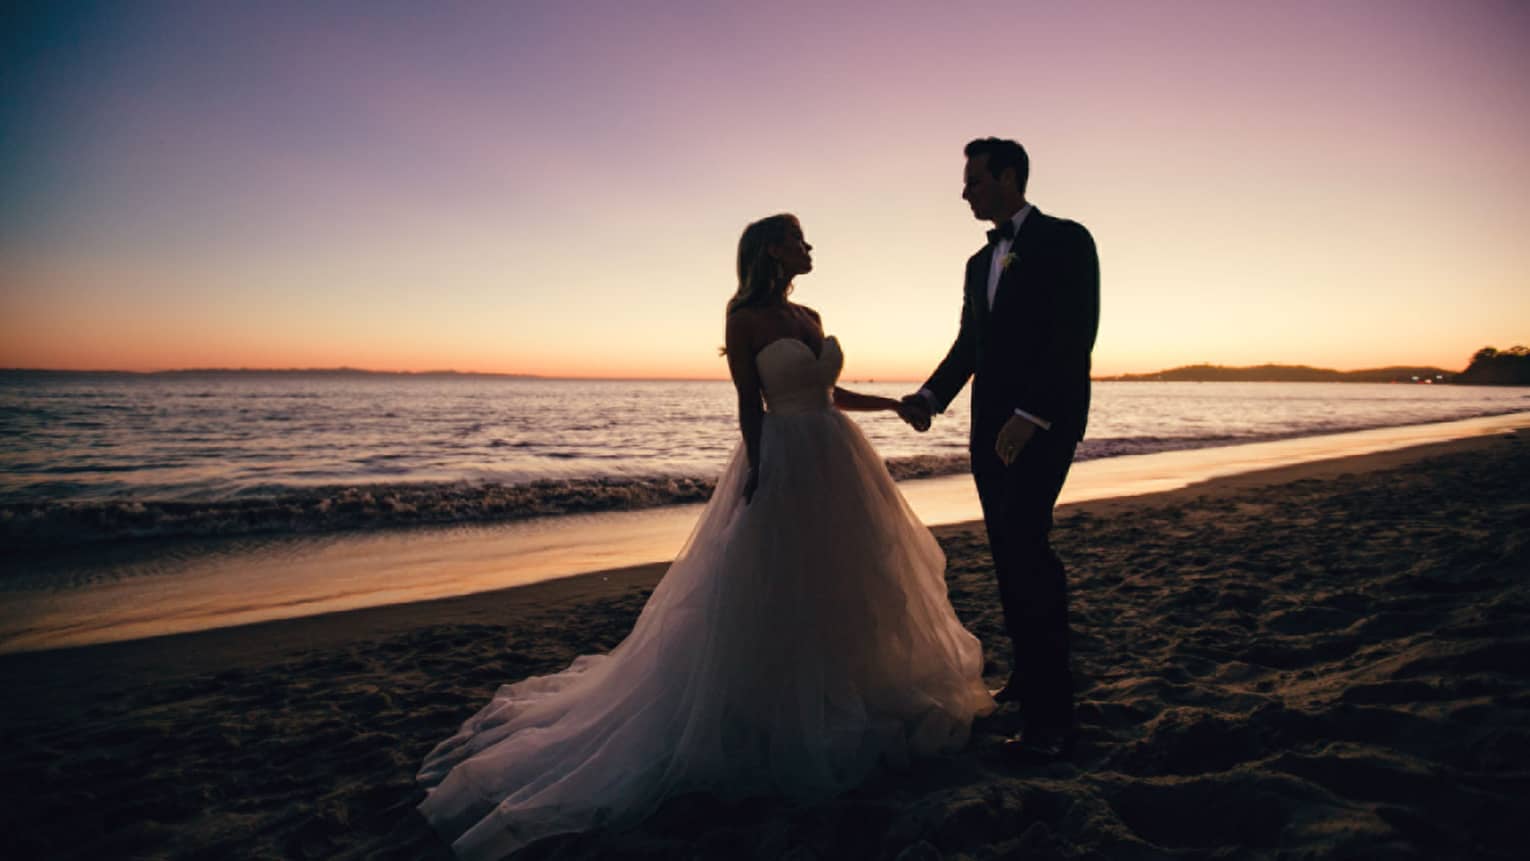 A silhouette of bride and groom standing by the ocean at dusk